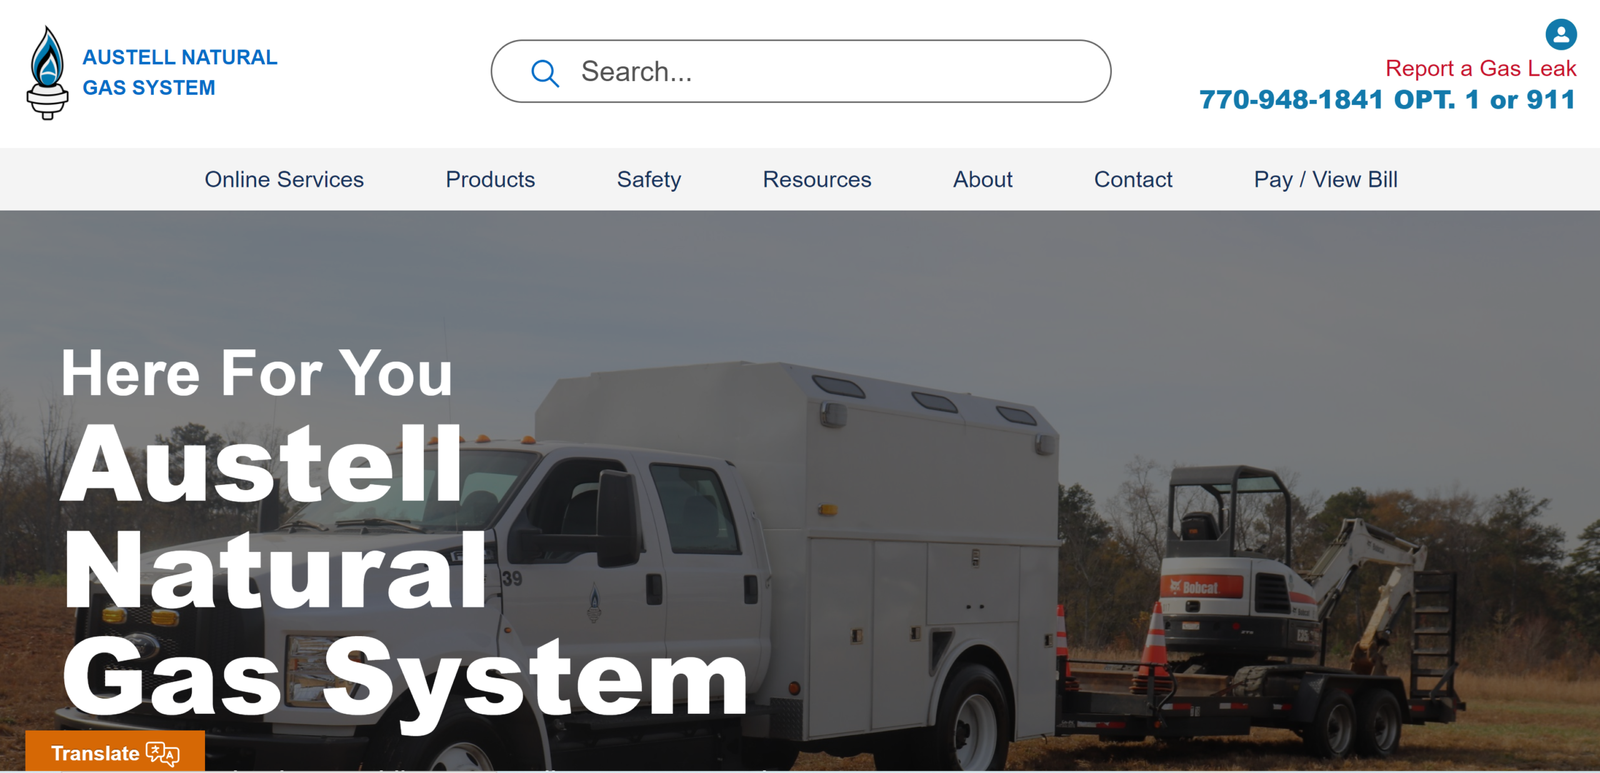 Austell Natural Gas System Login, Bill Payment & Customer Support Information